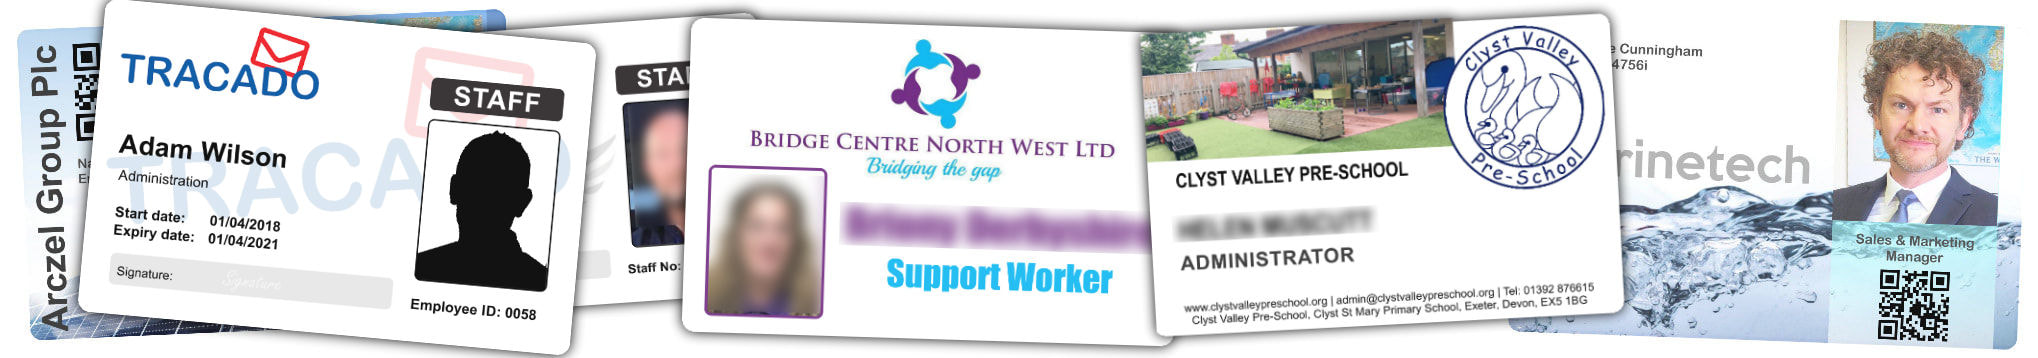 Blackpool examples of staff photo ID cards | samples of employee Identity card printing | Workers ID cards printed in 